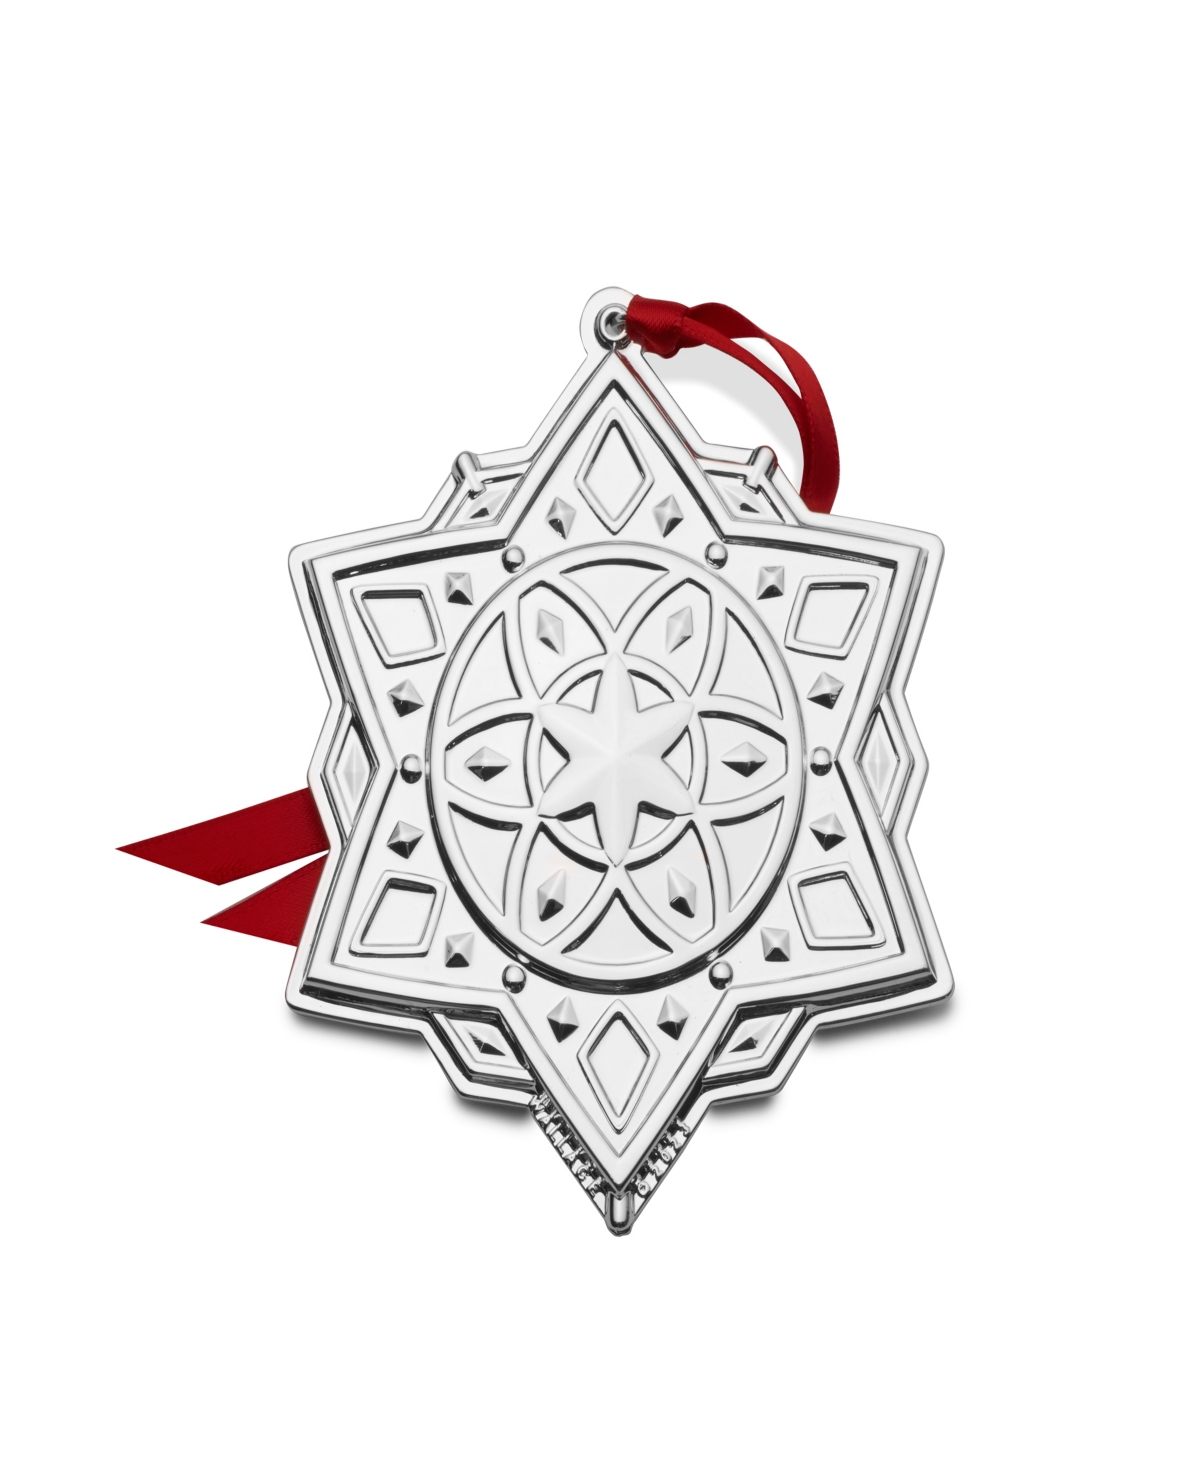 Wallace 2023 Silver Plated Snowflake Ornament, 3rd Edition